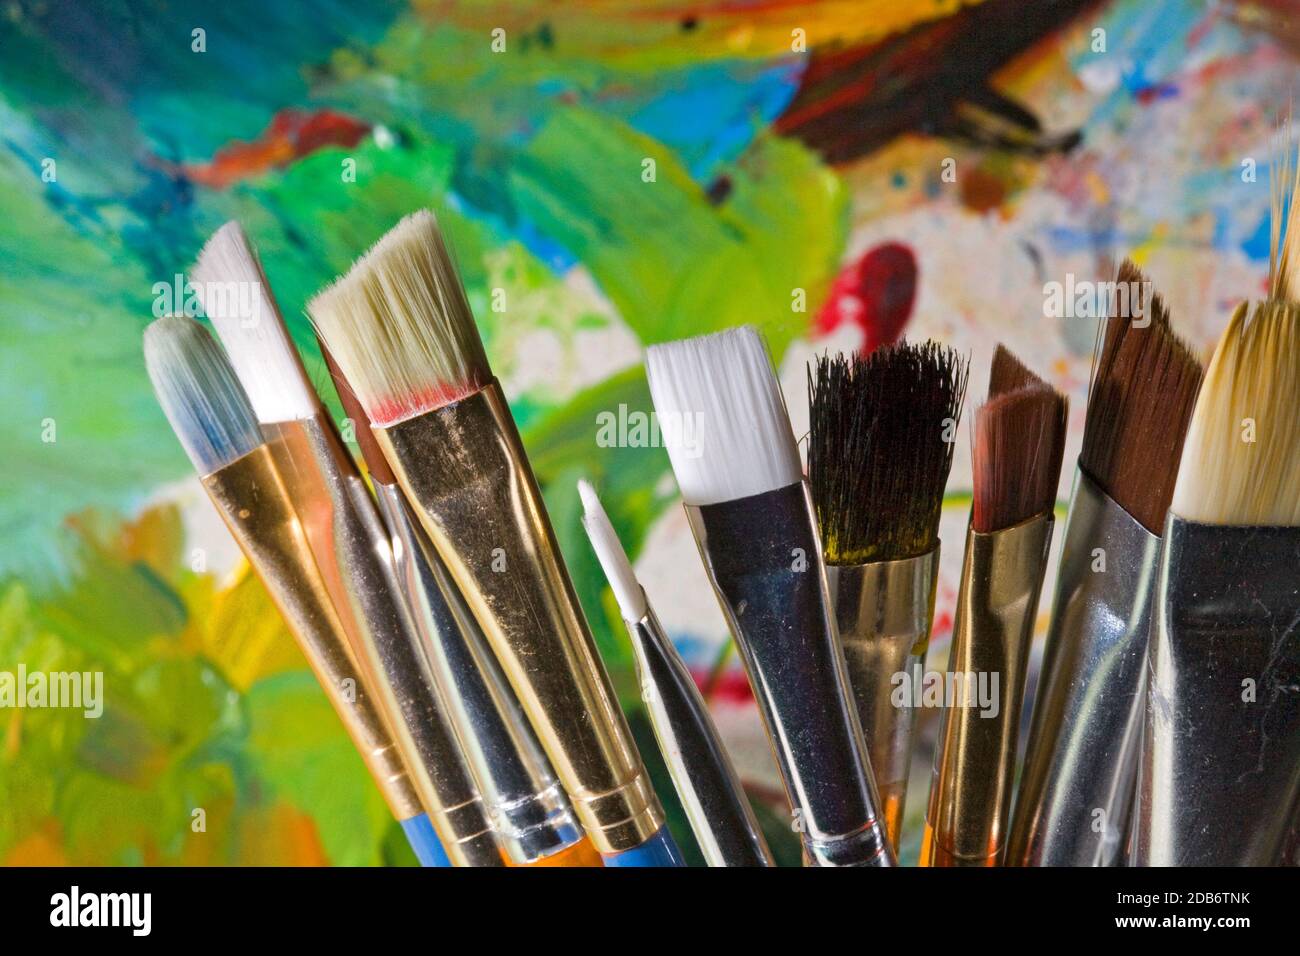 A group of different sized artist paintbrushes in a brightly colored holder in front of the painter's palette. Stock Photo